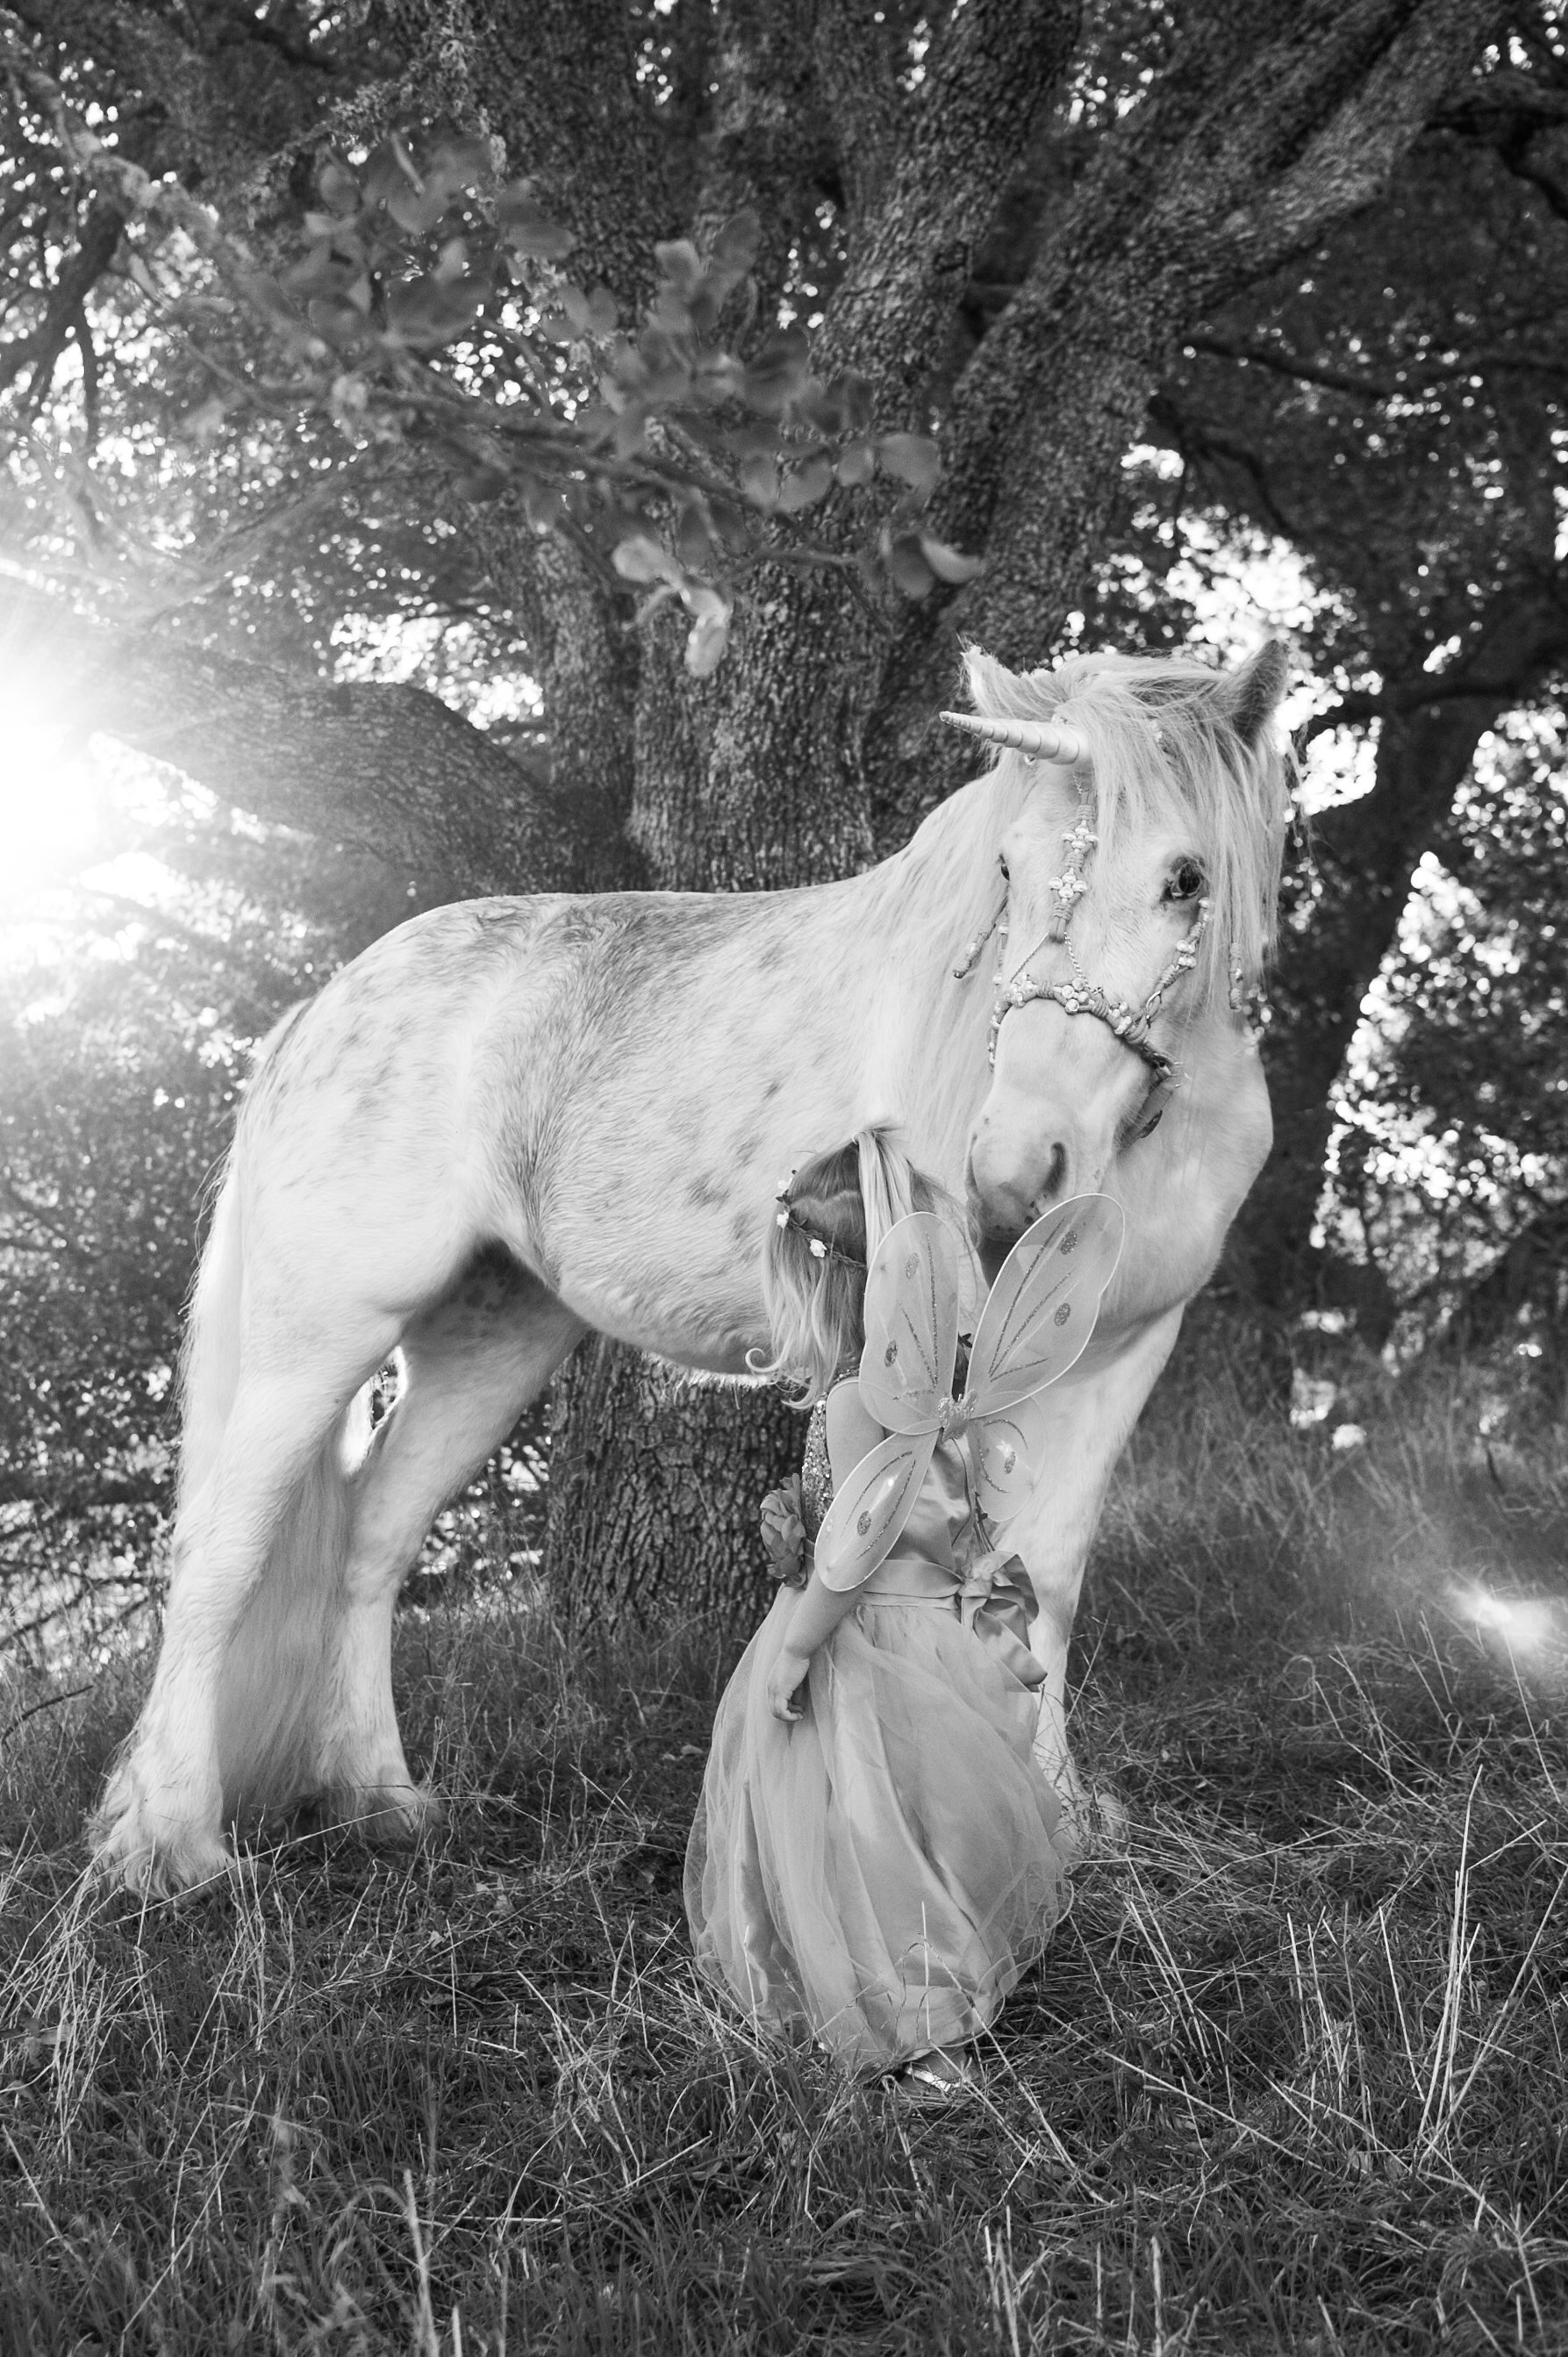 Unicorn and fairy pose under the light of the sun, in black and white image.